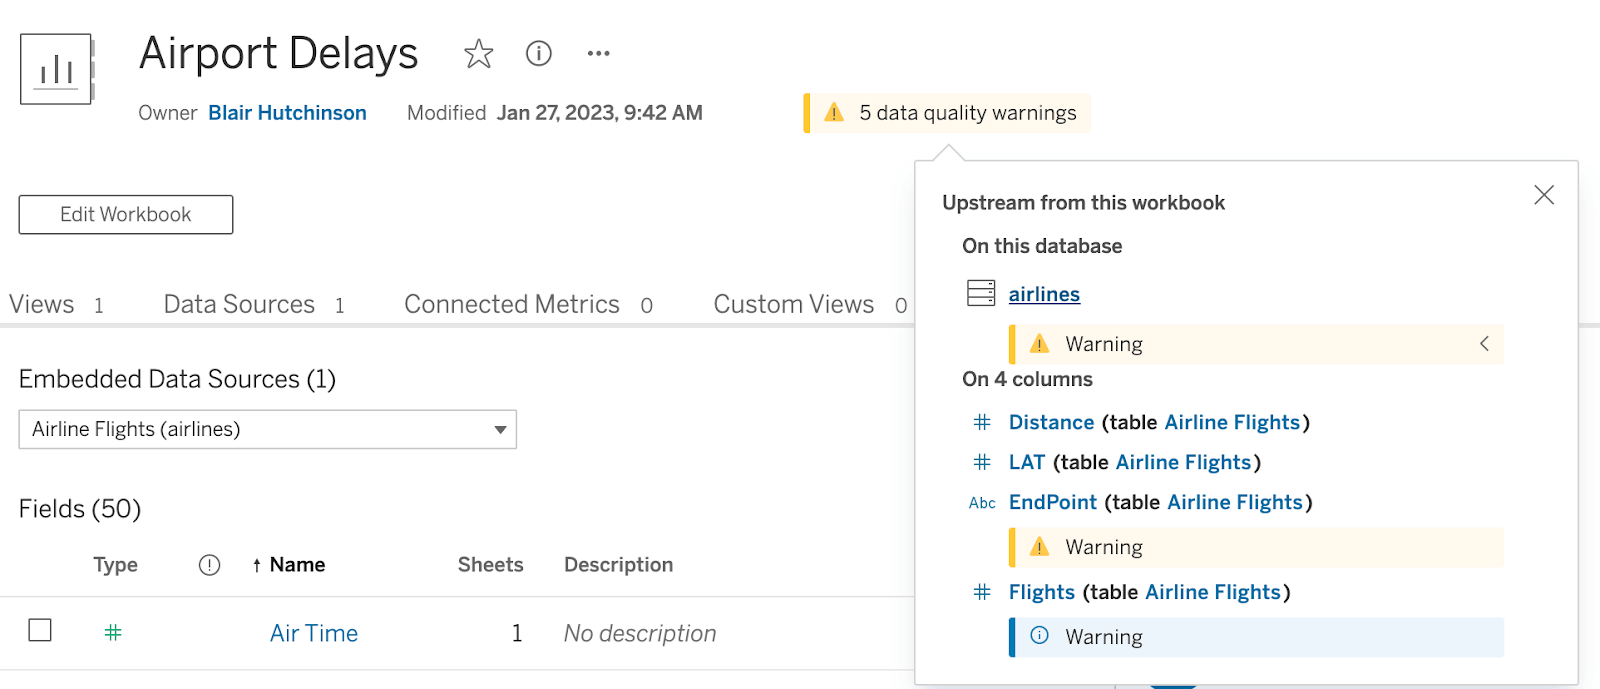 Notification showing five data quality warnings in a database named "Airline Flights"